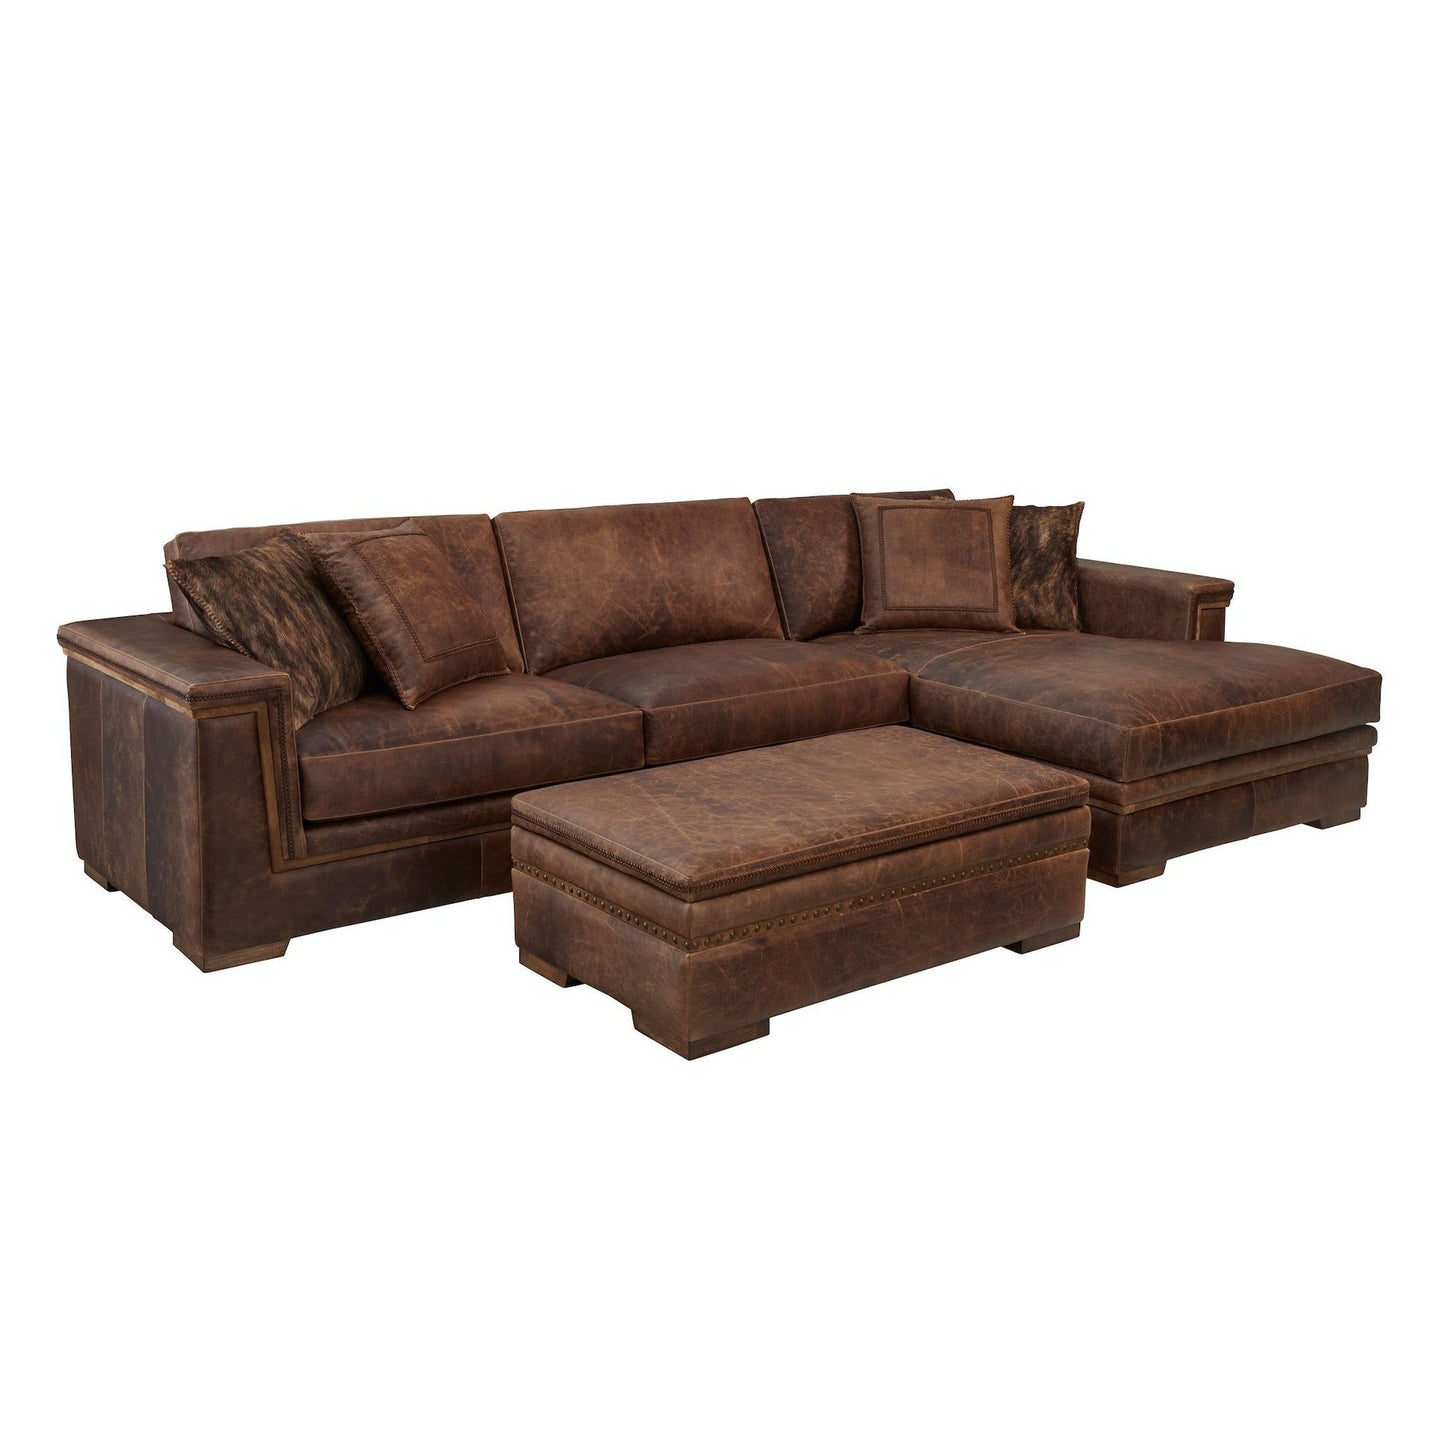 The Navajo Sectional with Chaise is a luxurious addition to any living area. Constructed from a solid wood frame and upholstered in top grain American Bison leather, the sectional features pocketed coil seating for superior comfort and support. It comes with a stylish square arm and is stuffed with down for a touch of Western luxury.